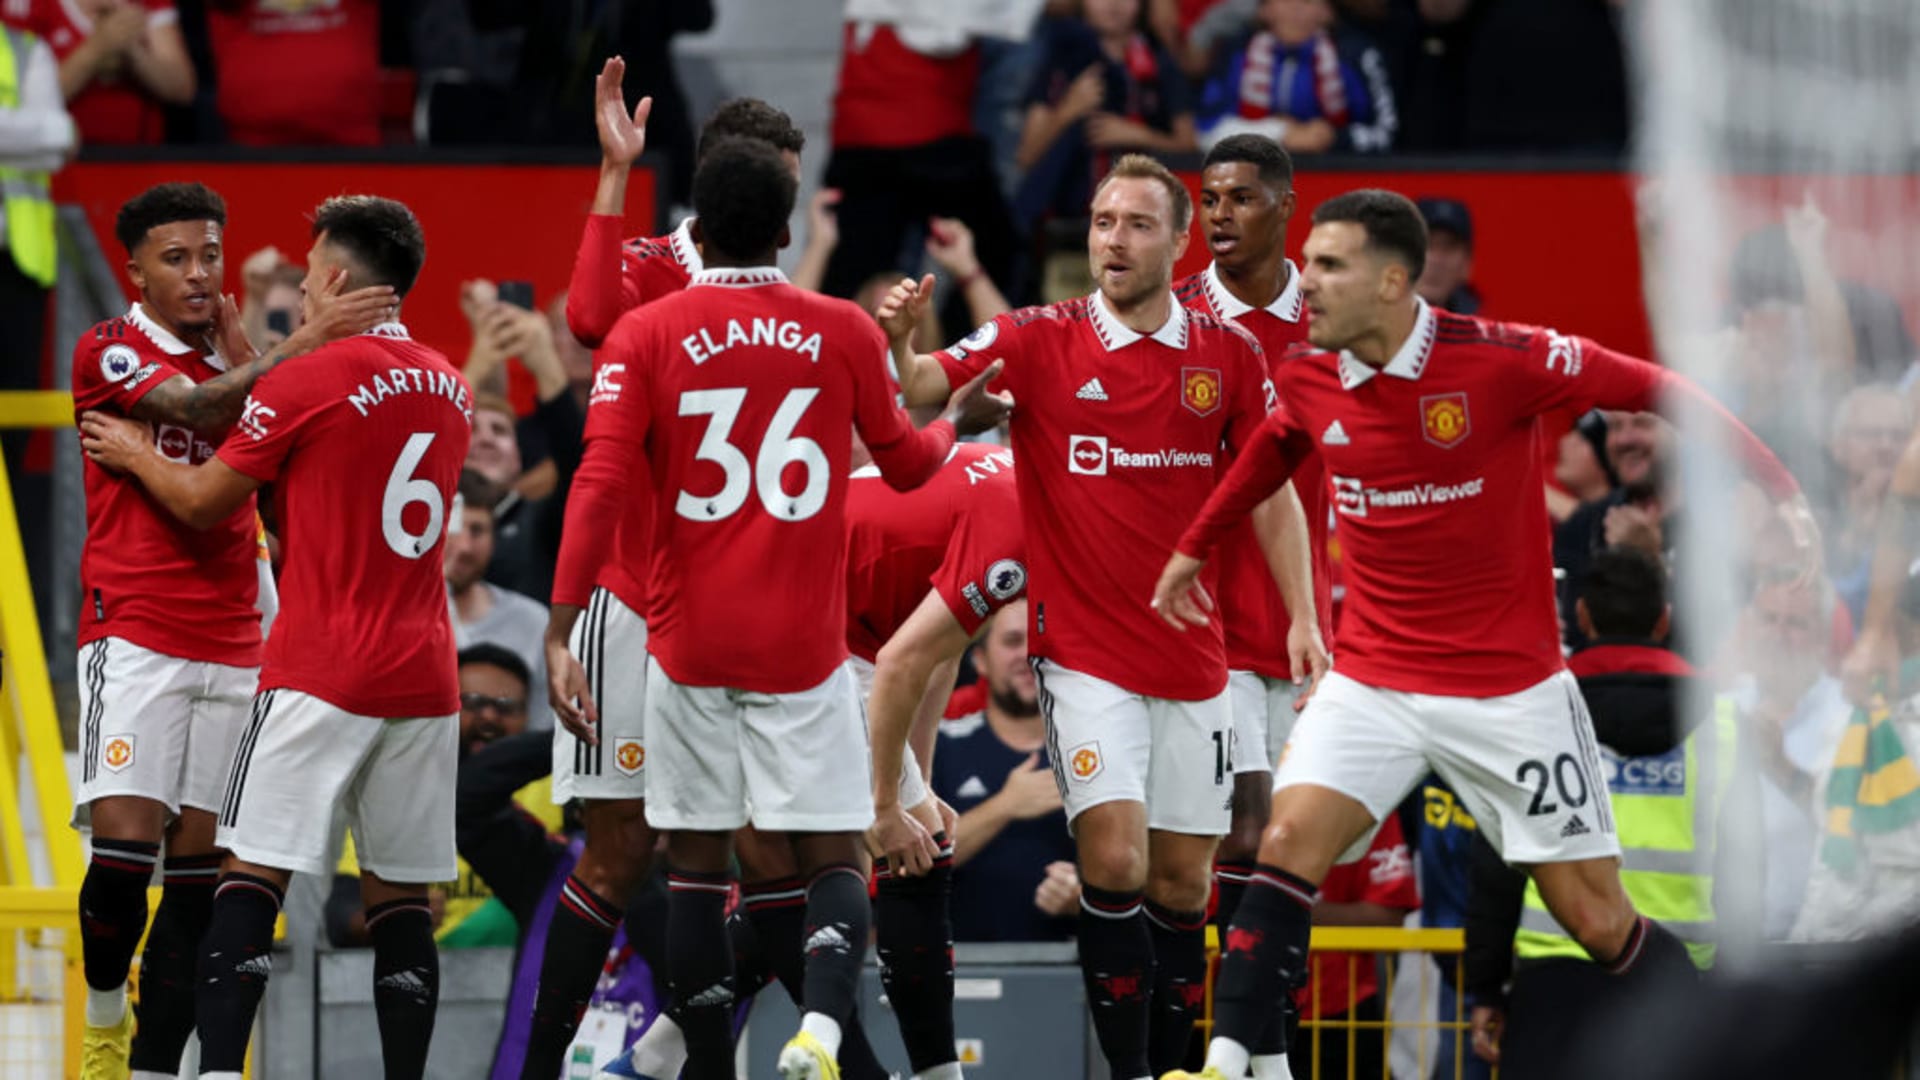 Manchester United Vs Southampton, Premier League 2022 23 Matchweek 4: Get Schedule And Watch Live Streaming And Telecast In India